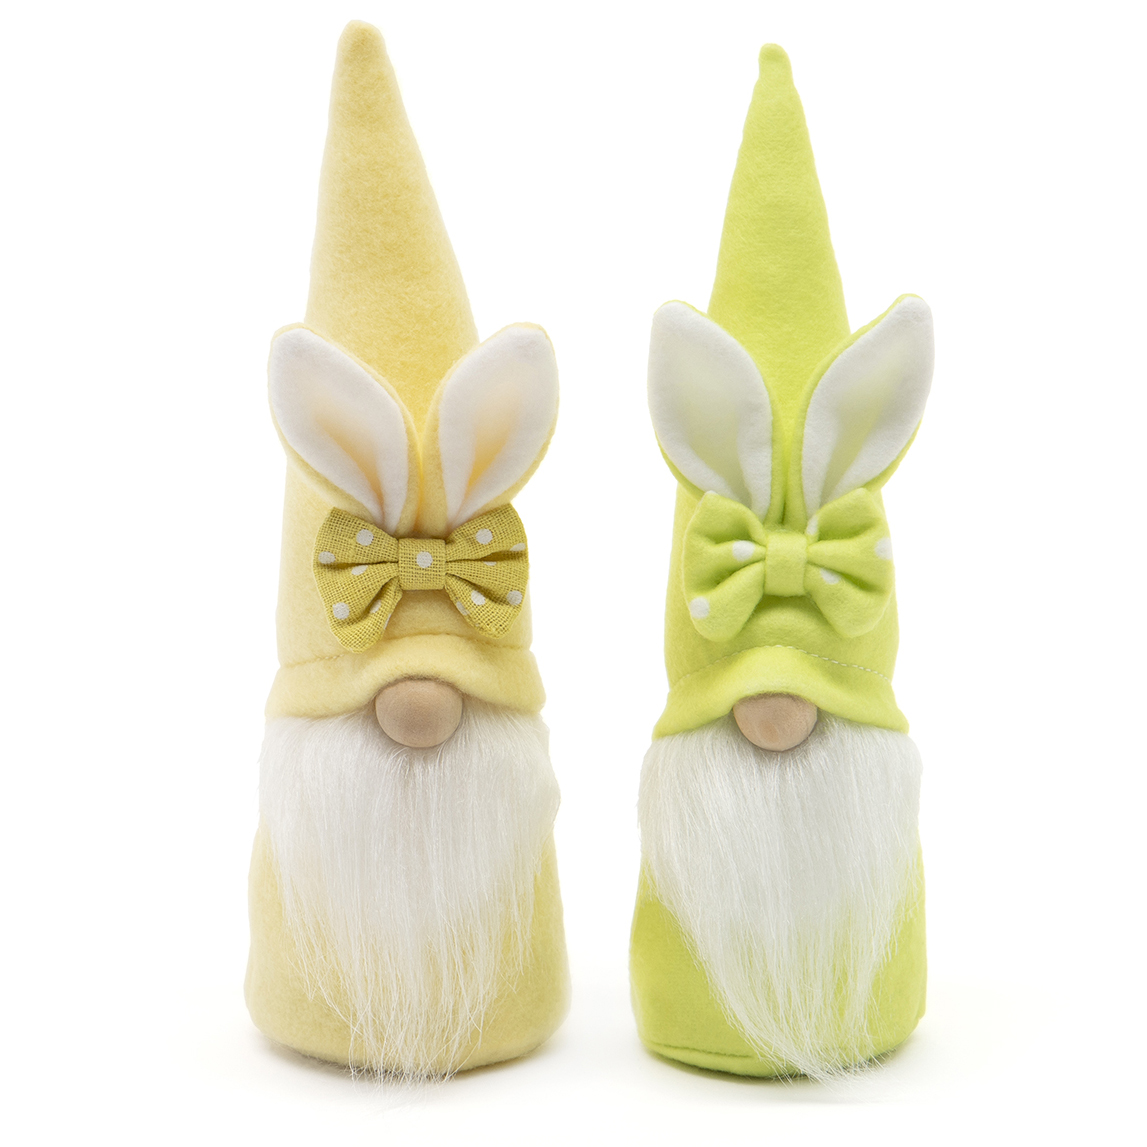 Gnome with Bow/Bunny Ears, Wood Nose Set of 2